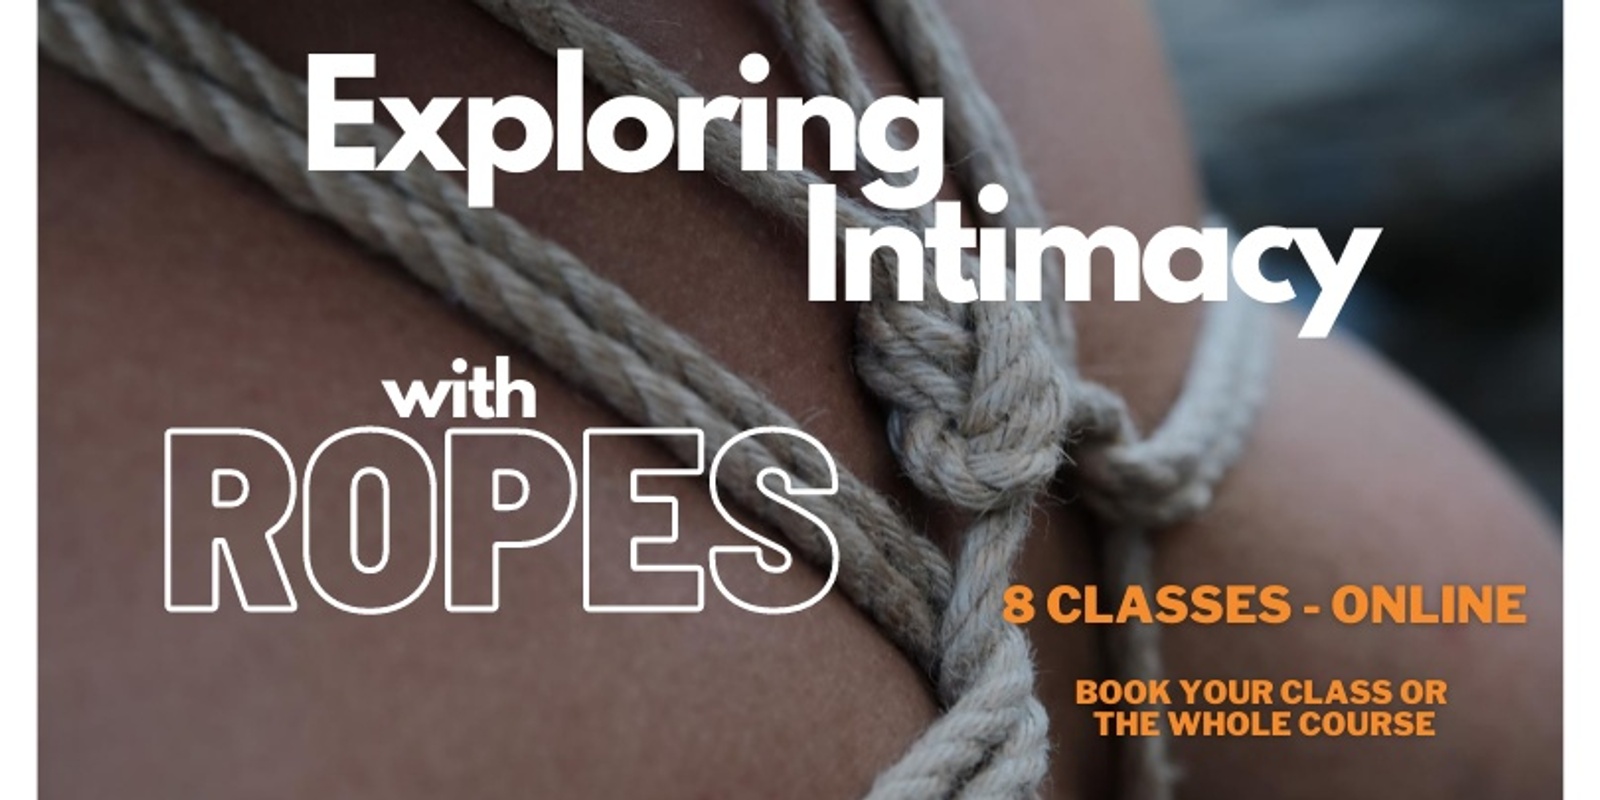 Banner image for Exploring intimacy with ropes